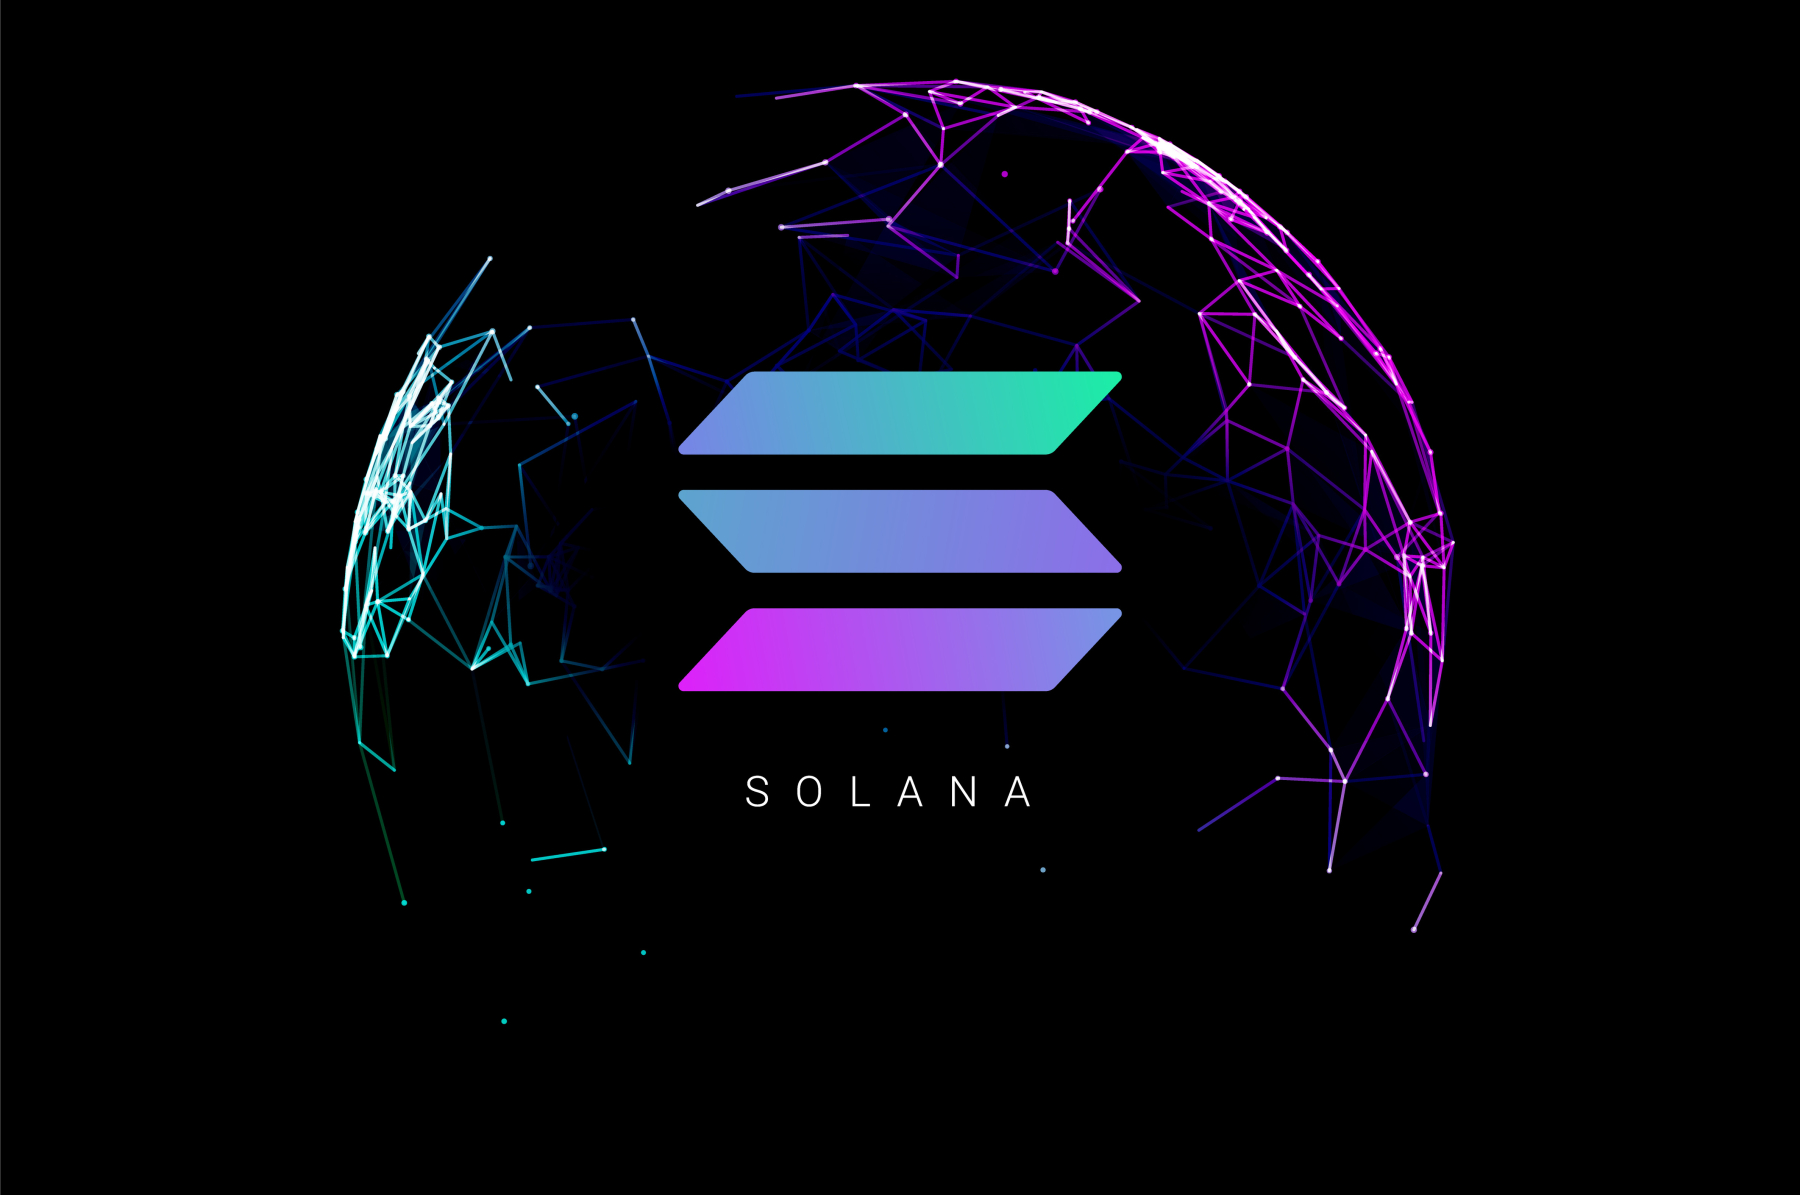 Solana loses over 50 percent of its value during FTX collapse
